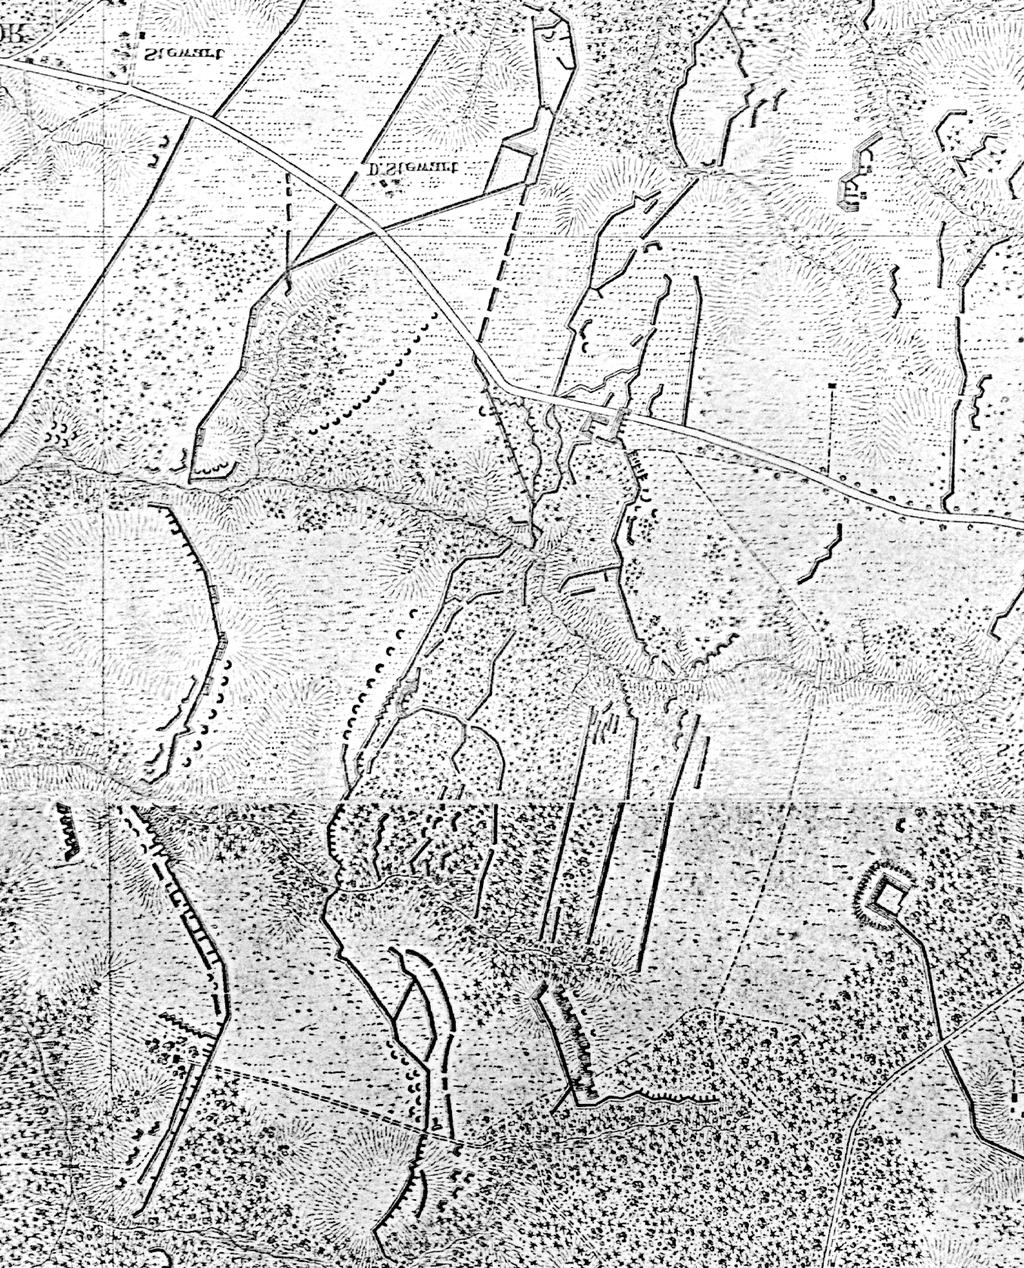 Detail showing fortifications at Cold Harbor in the vicinity of the National Park Cold Harbor Unit.